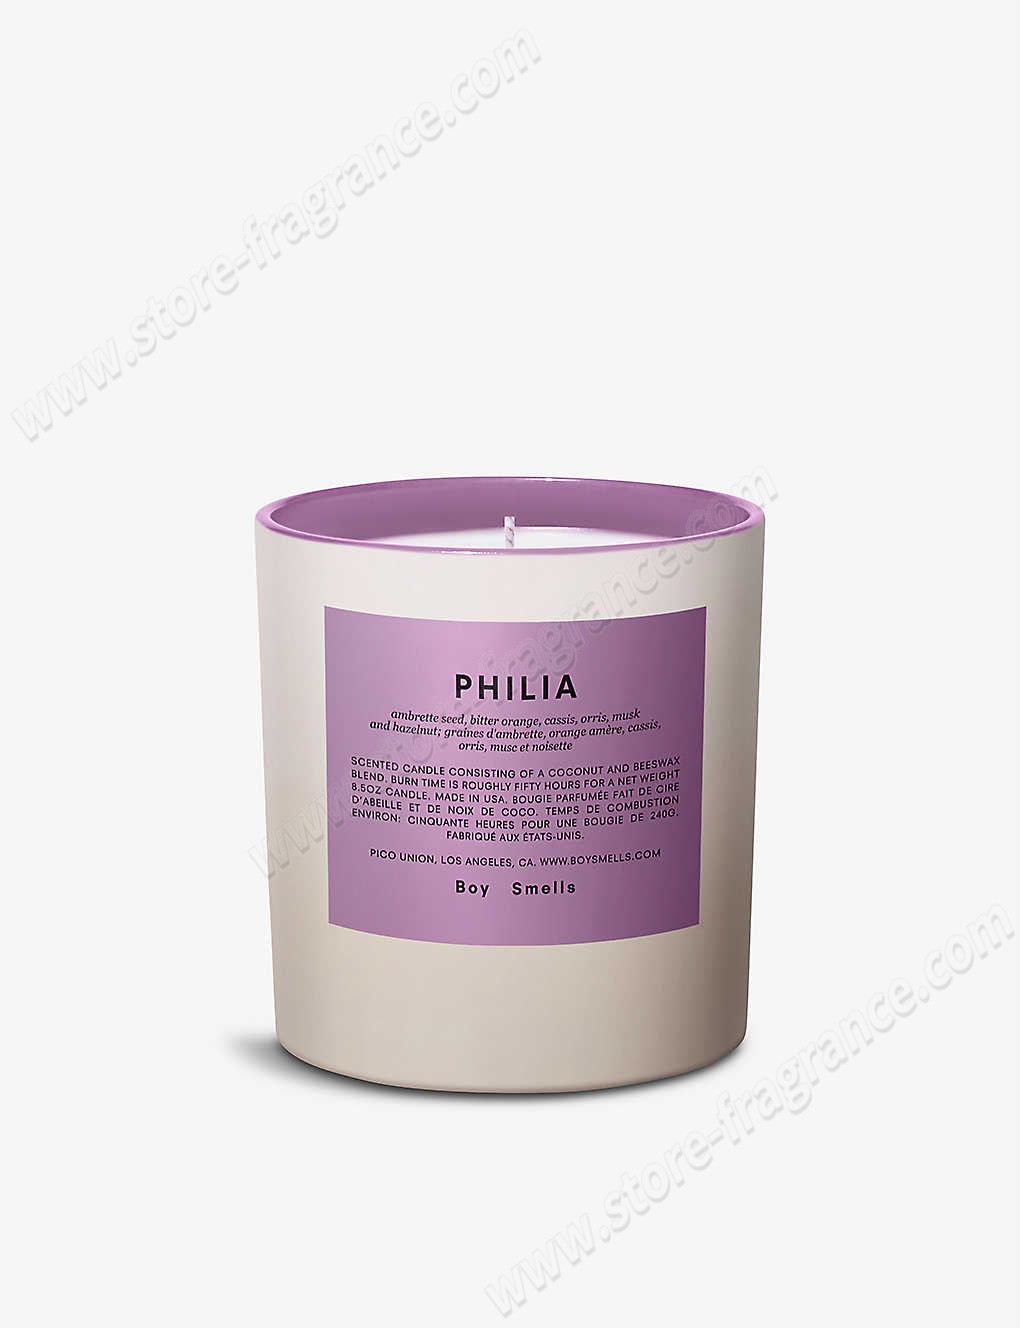 BOY SMELLS/Pride Philia scented candle 240g ✿ Discount Store - BOY SMELLS/Pride Philia scented candle 240g ✿ Discount Store